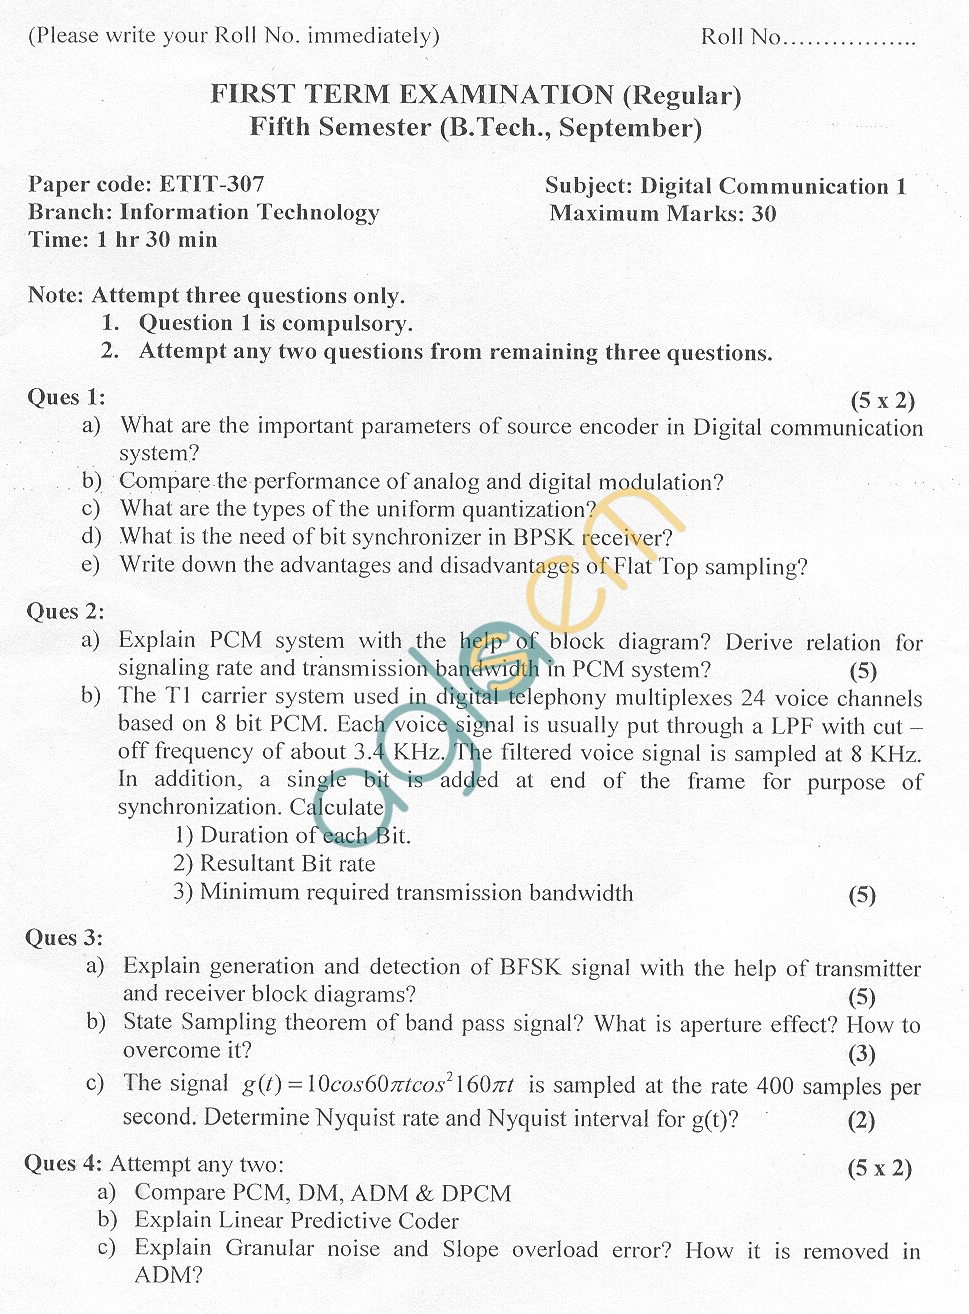 GGSIPU Question Papers Fifth Semester  First Term 2010  ETIT-307